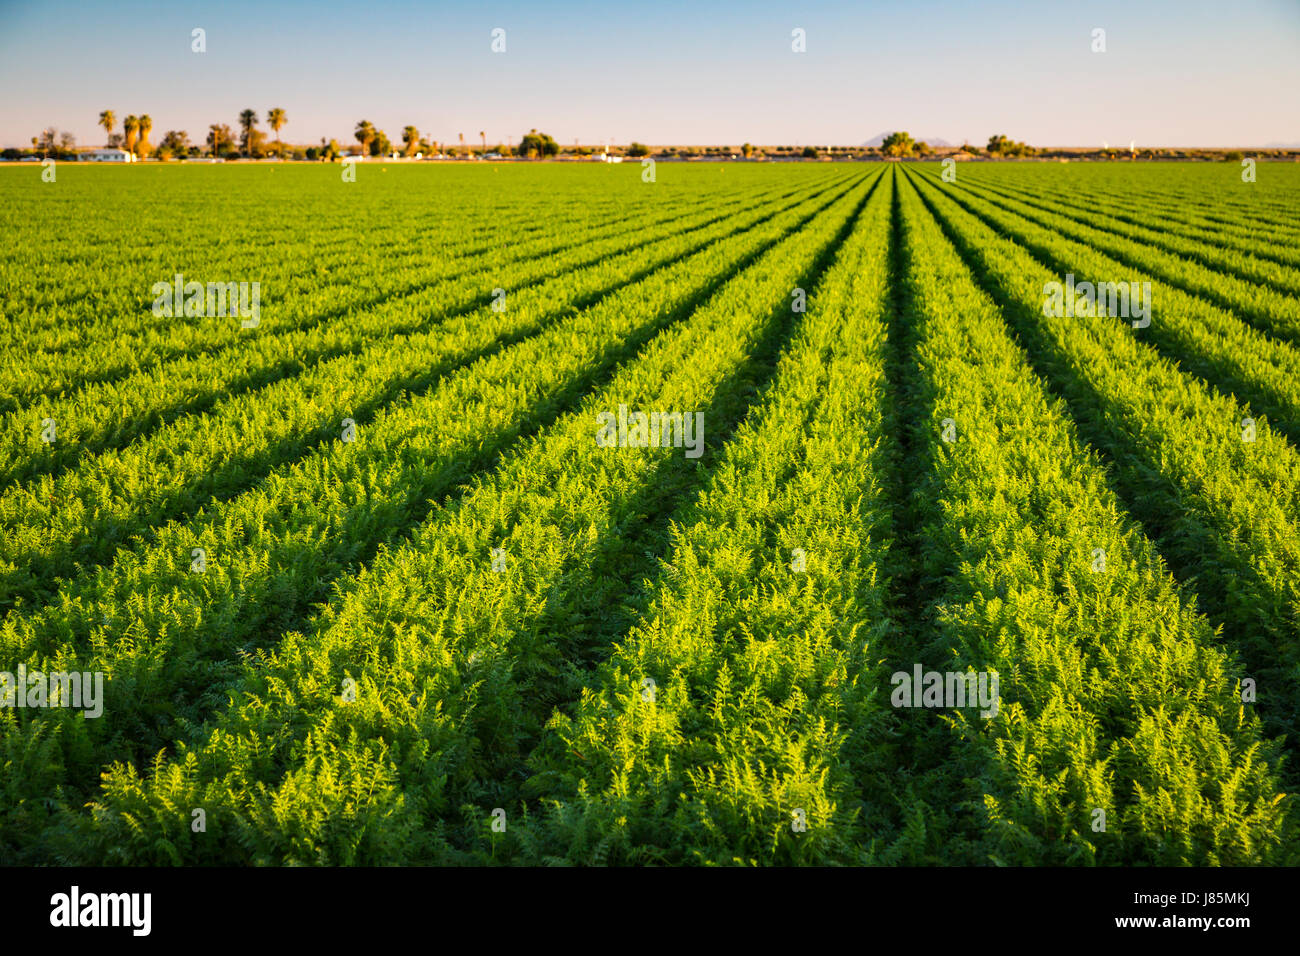 A green field of row crop in the Imperial Valley of California, USA. Stock Photo